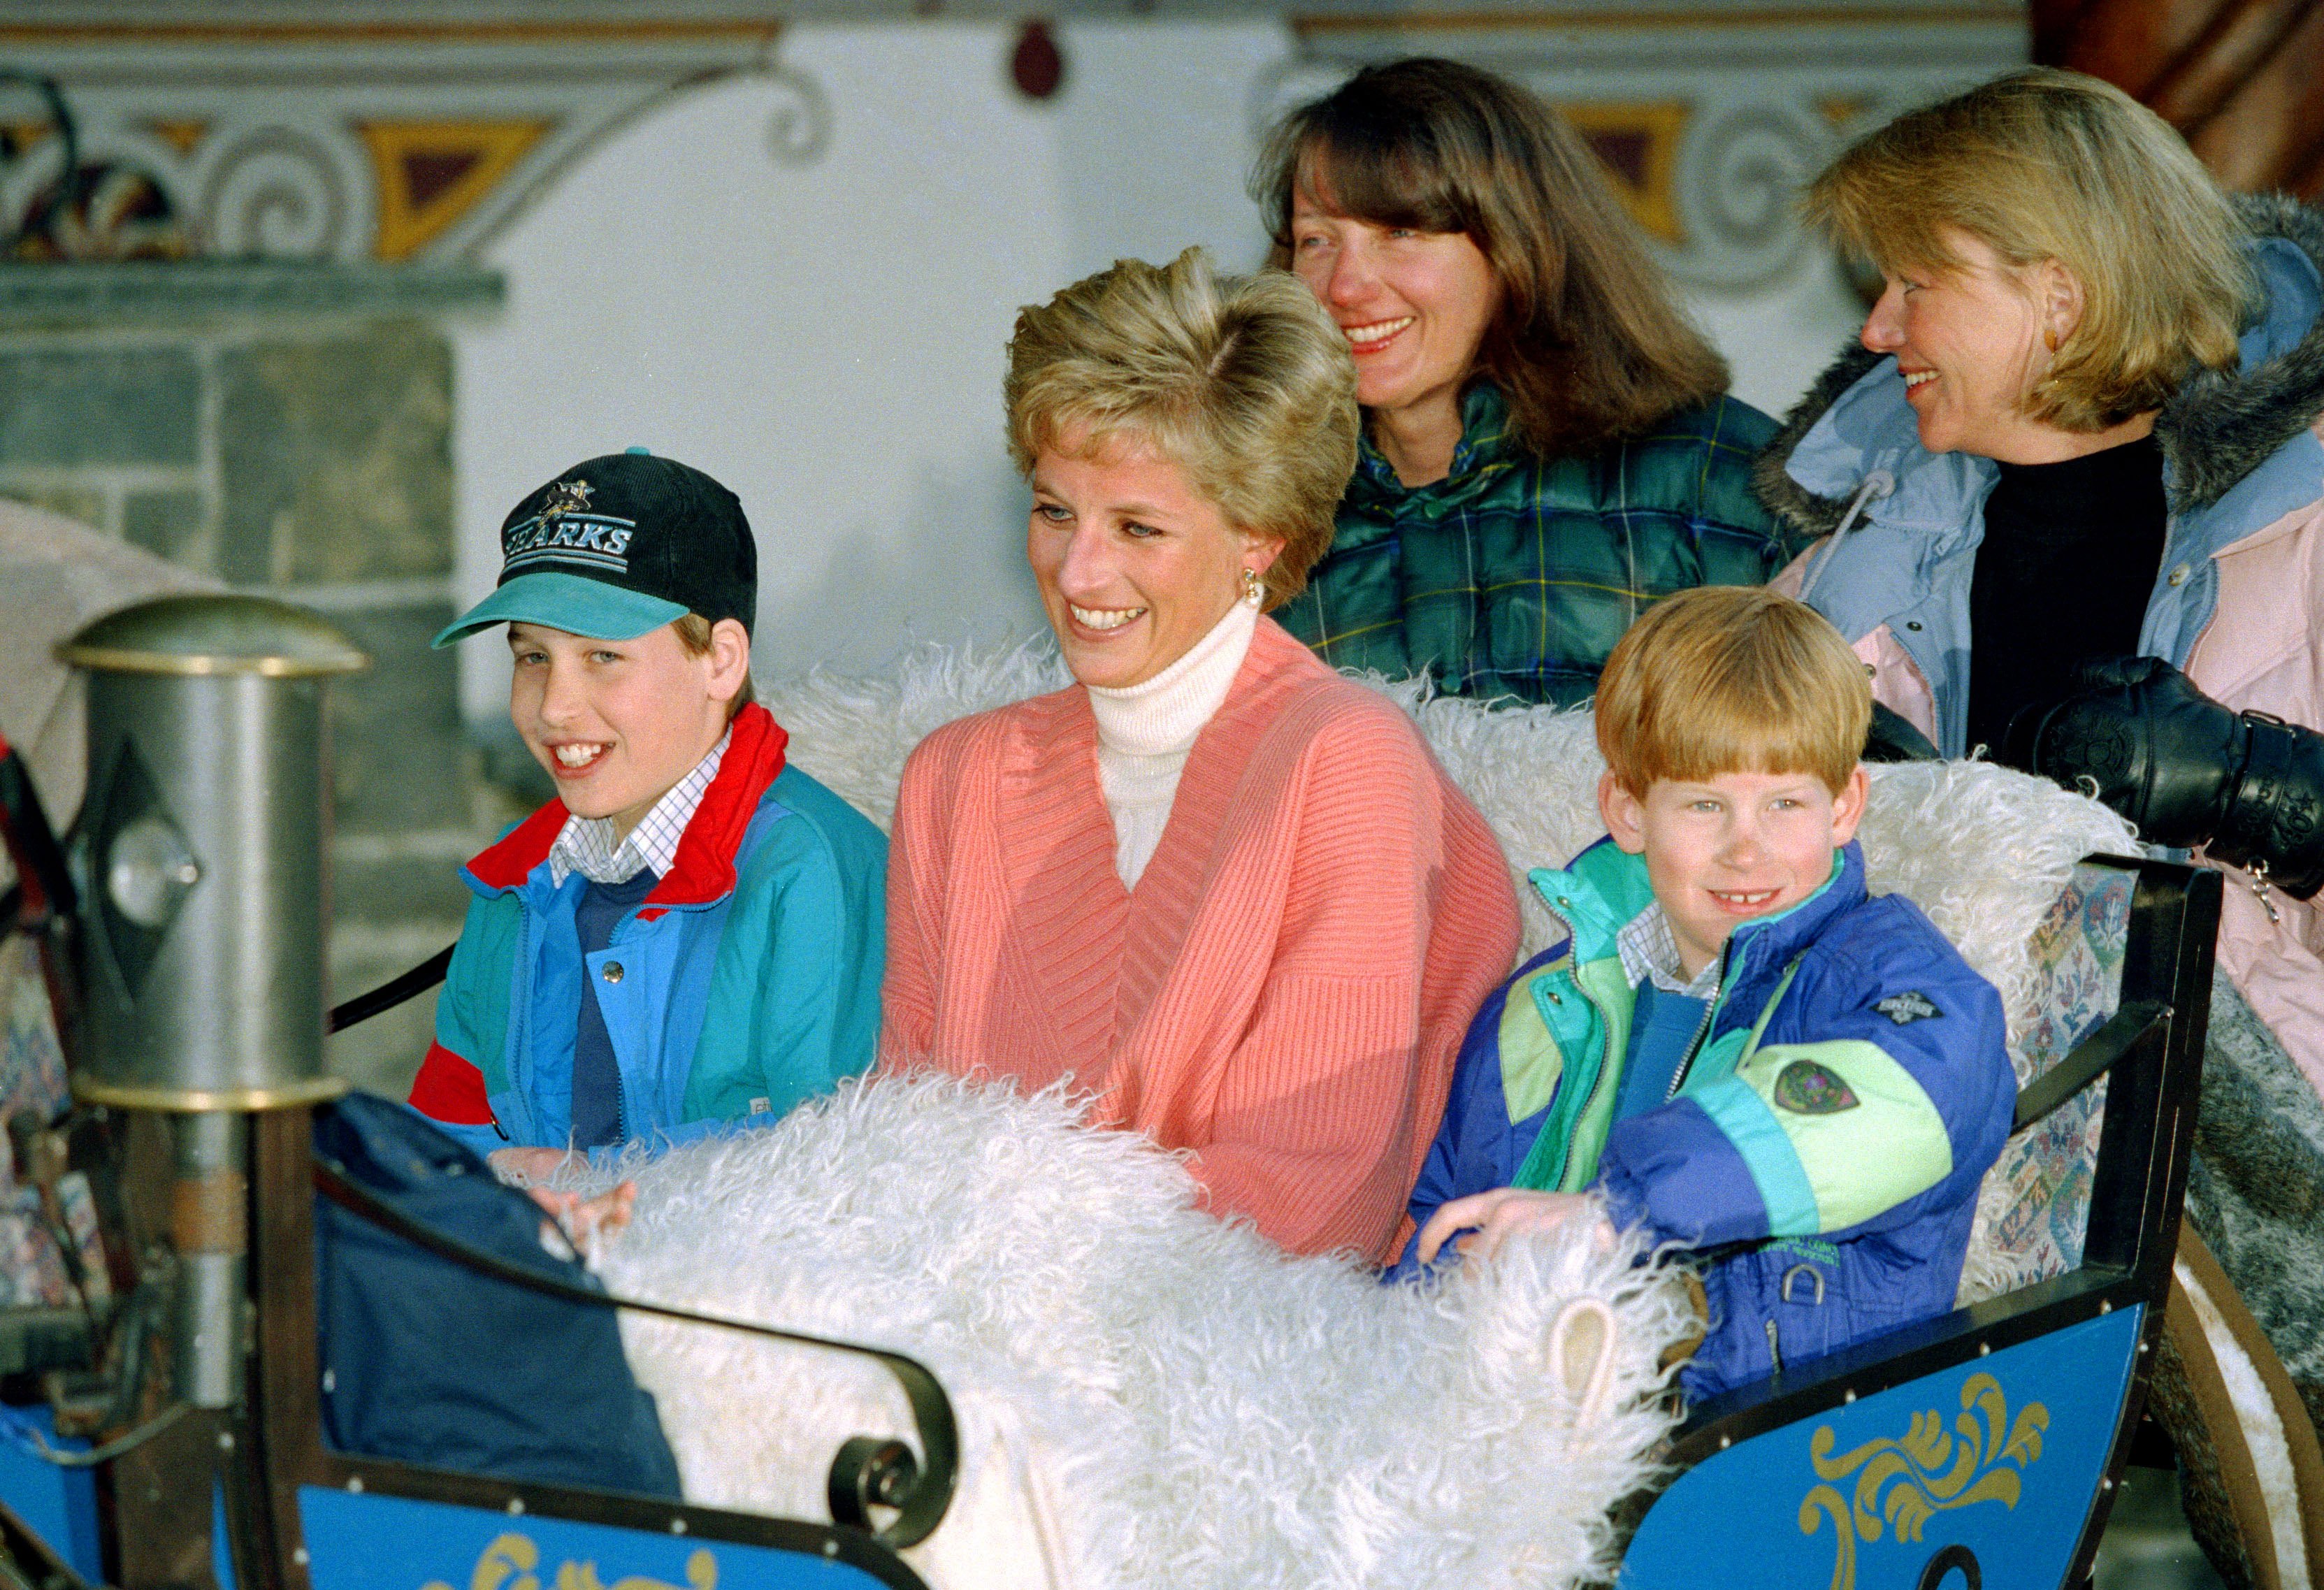 Prince William, Princess Diana, and Prince Harry in Lech, Austria during their annual ski holiday on March 27, 1994. | Source: Getty Images